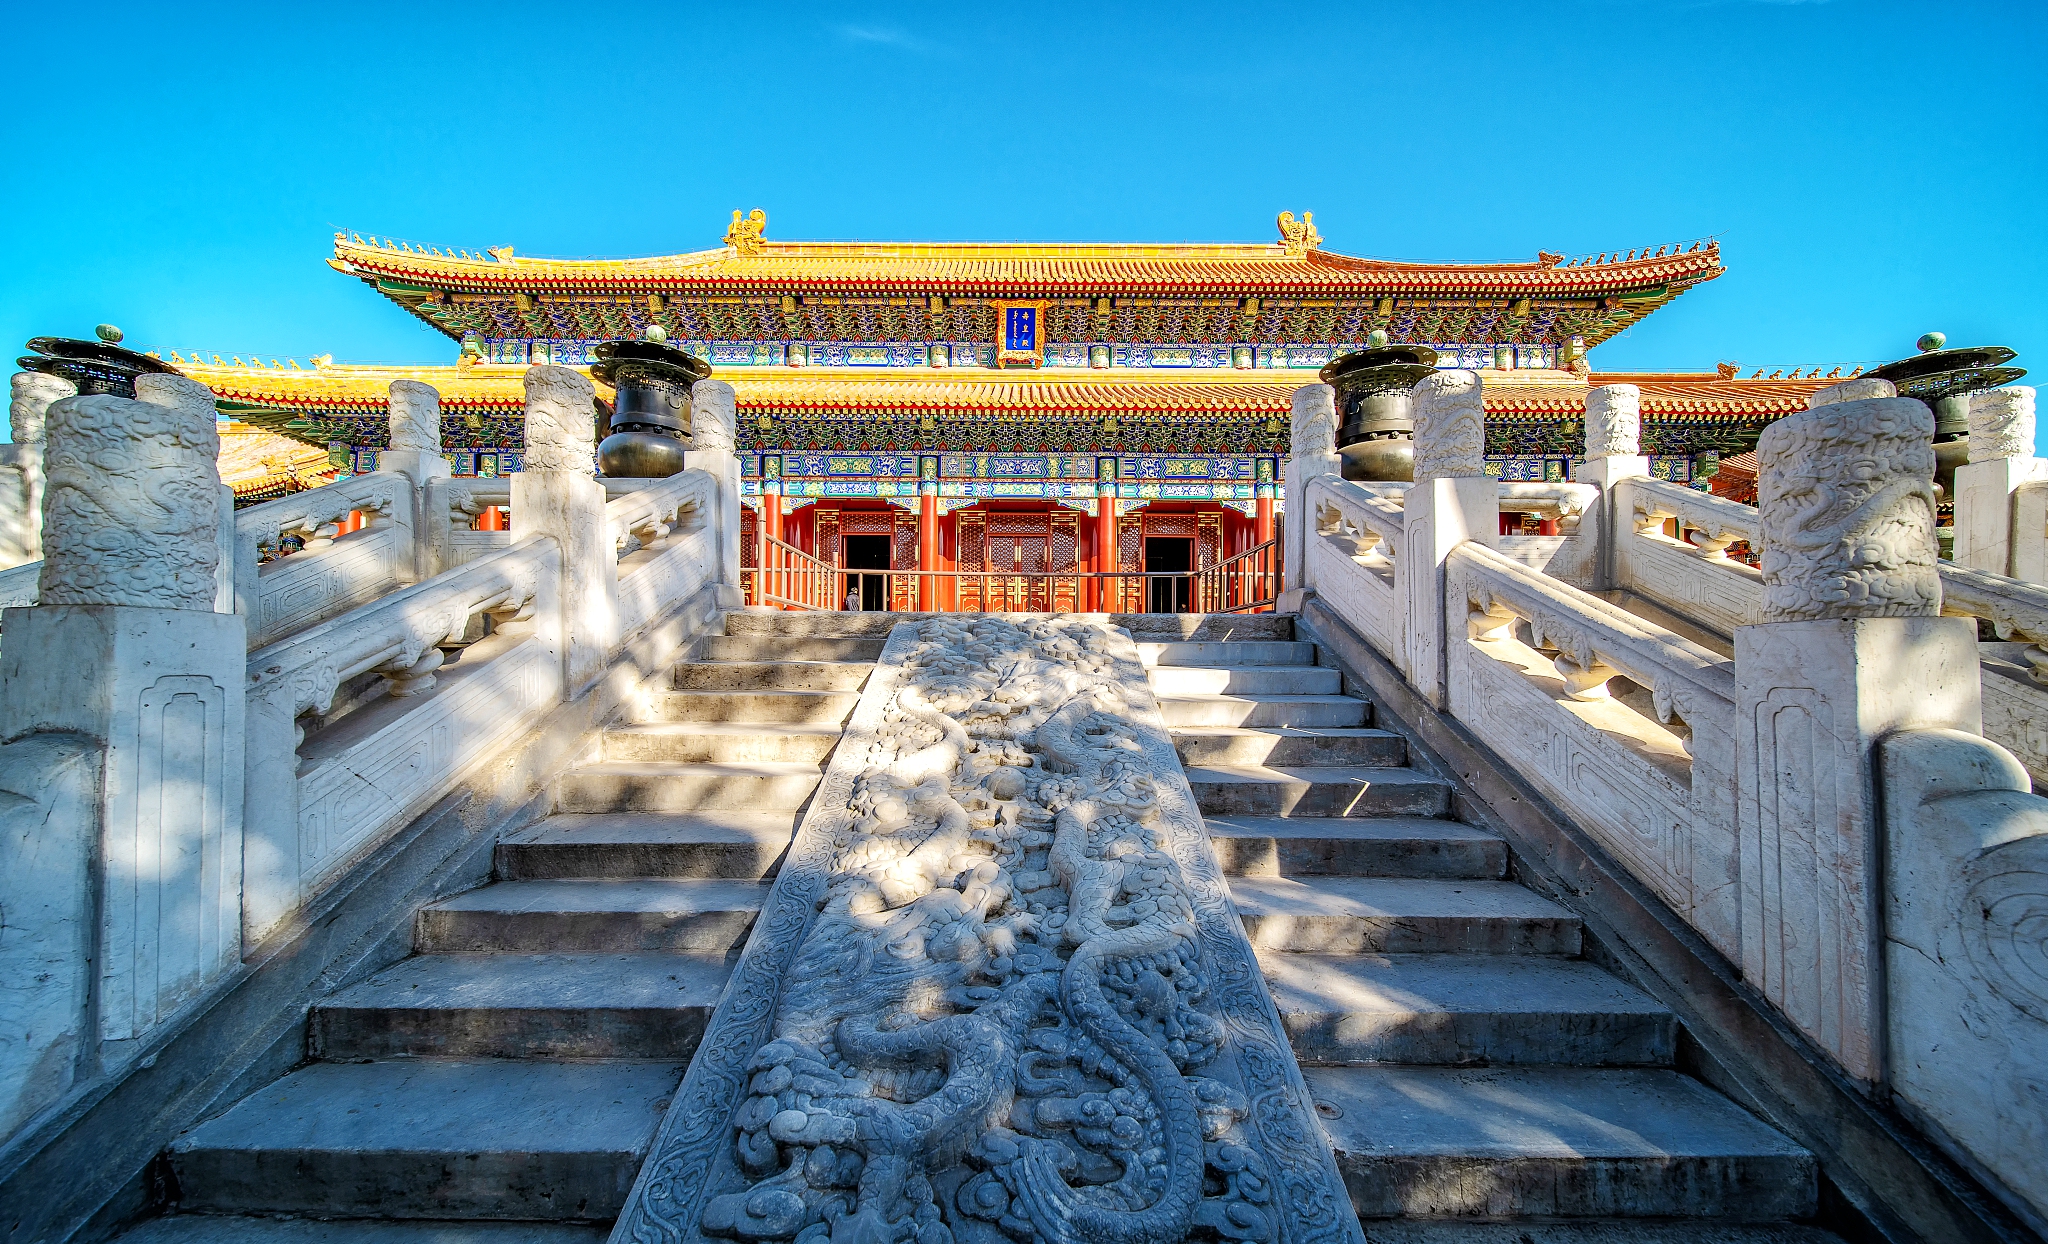 A file photo shows Shouhuang Palace in Jingshan Park, situated along the Beijing Central Axis. /CFP